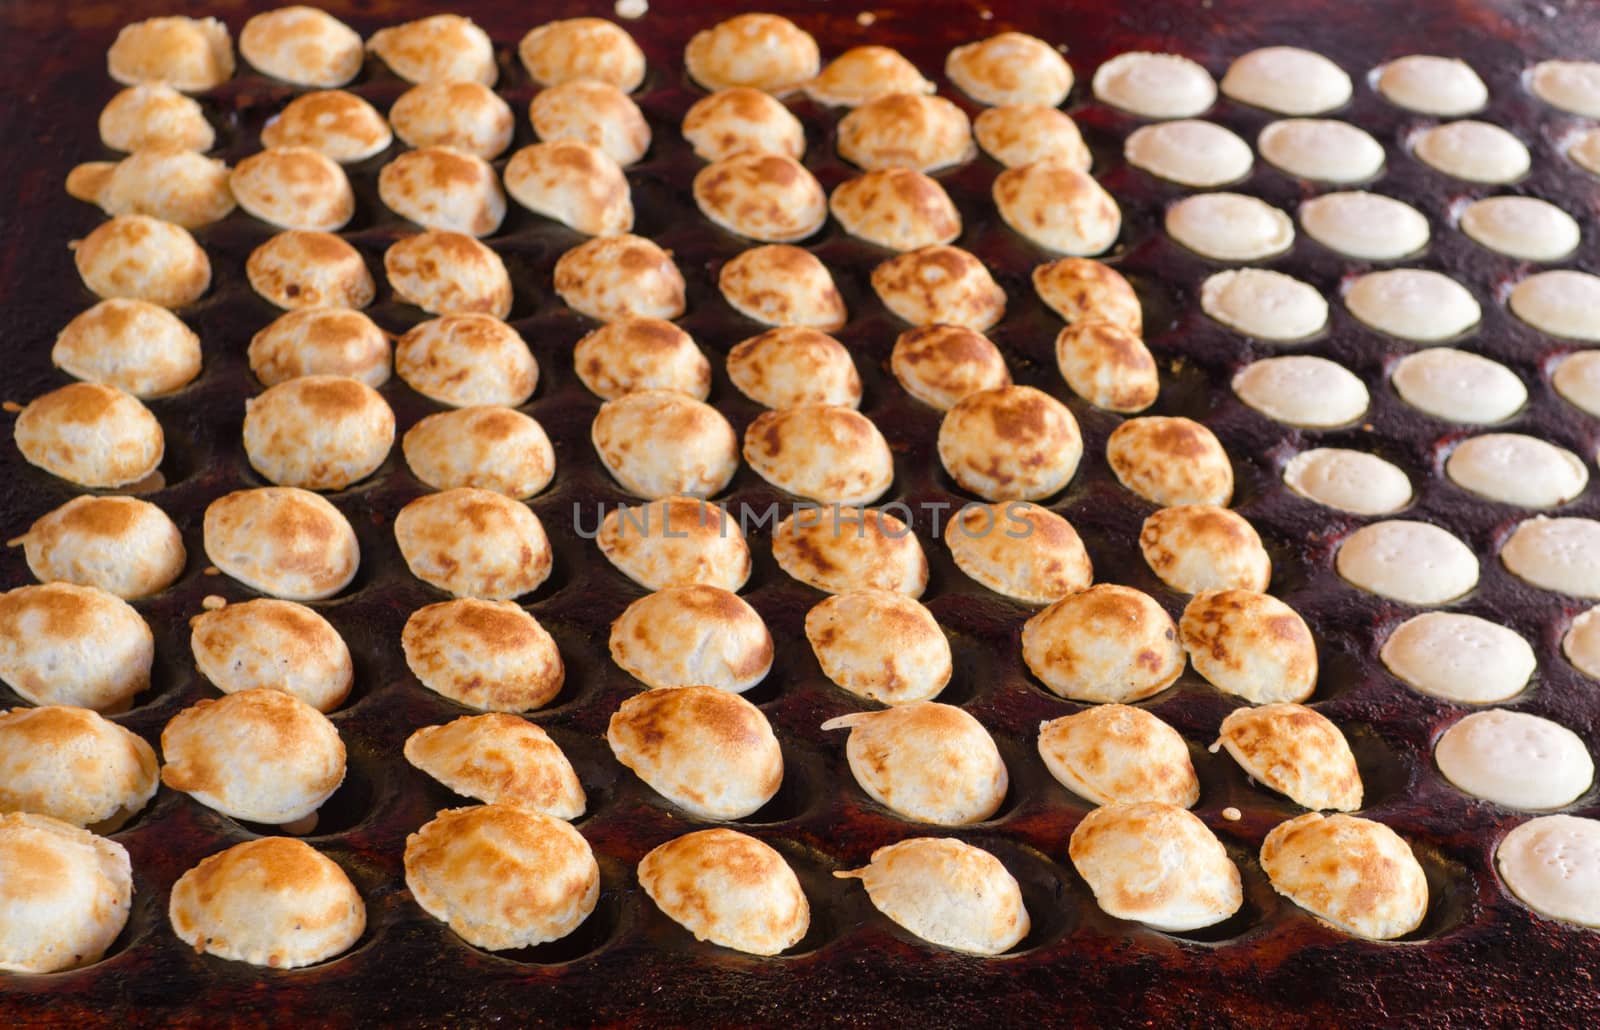 freshly baked traditional Dutch mini pancakes called "poffertjes by Tetyana